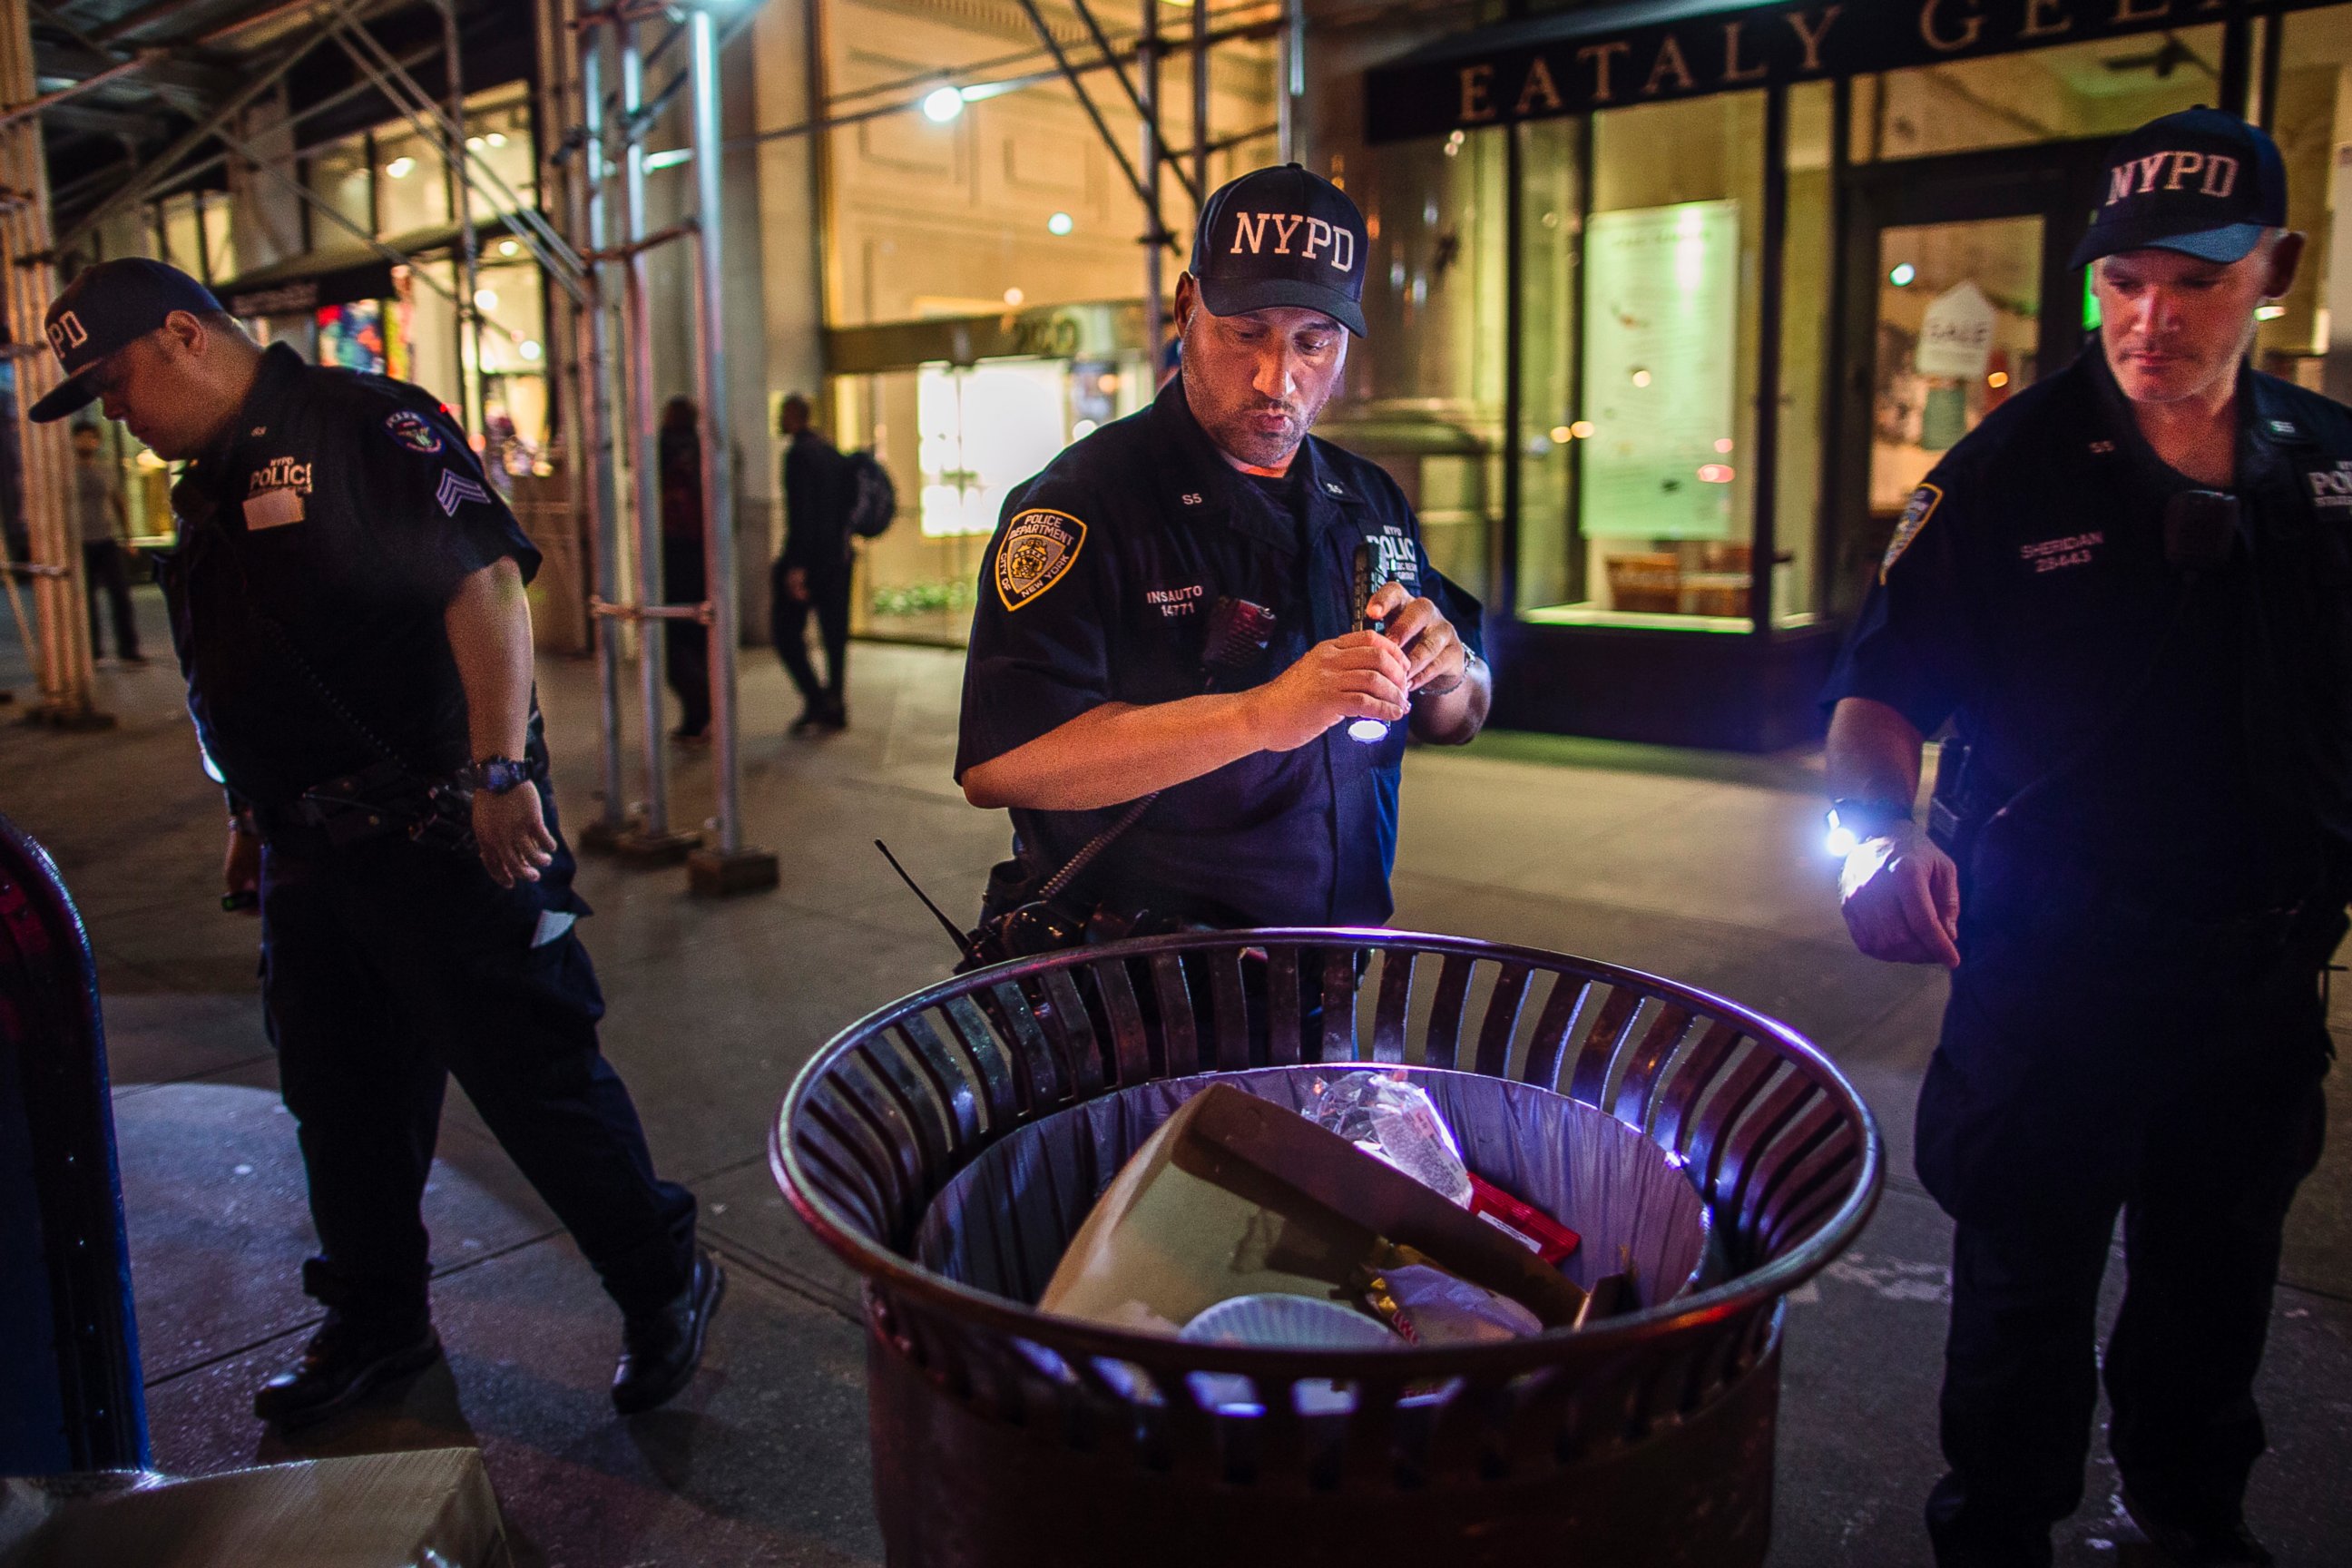 PHOTO: Police officers look for suspicious packages along Fifth Avenue near the scene of an explosion on West 23rd Street and 6th Avenue in Manhattan's Chelsea neighborhood, in New York, Sept. 18, 2016.